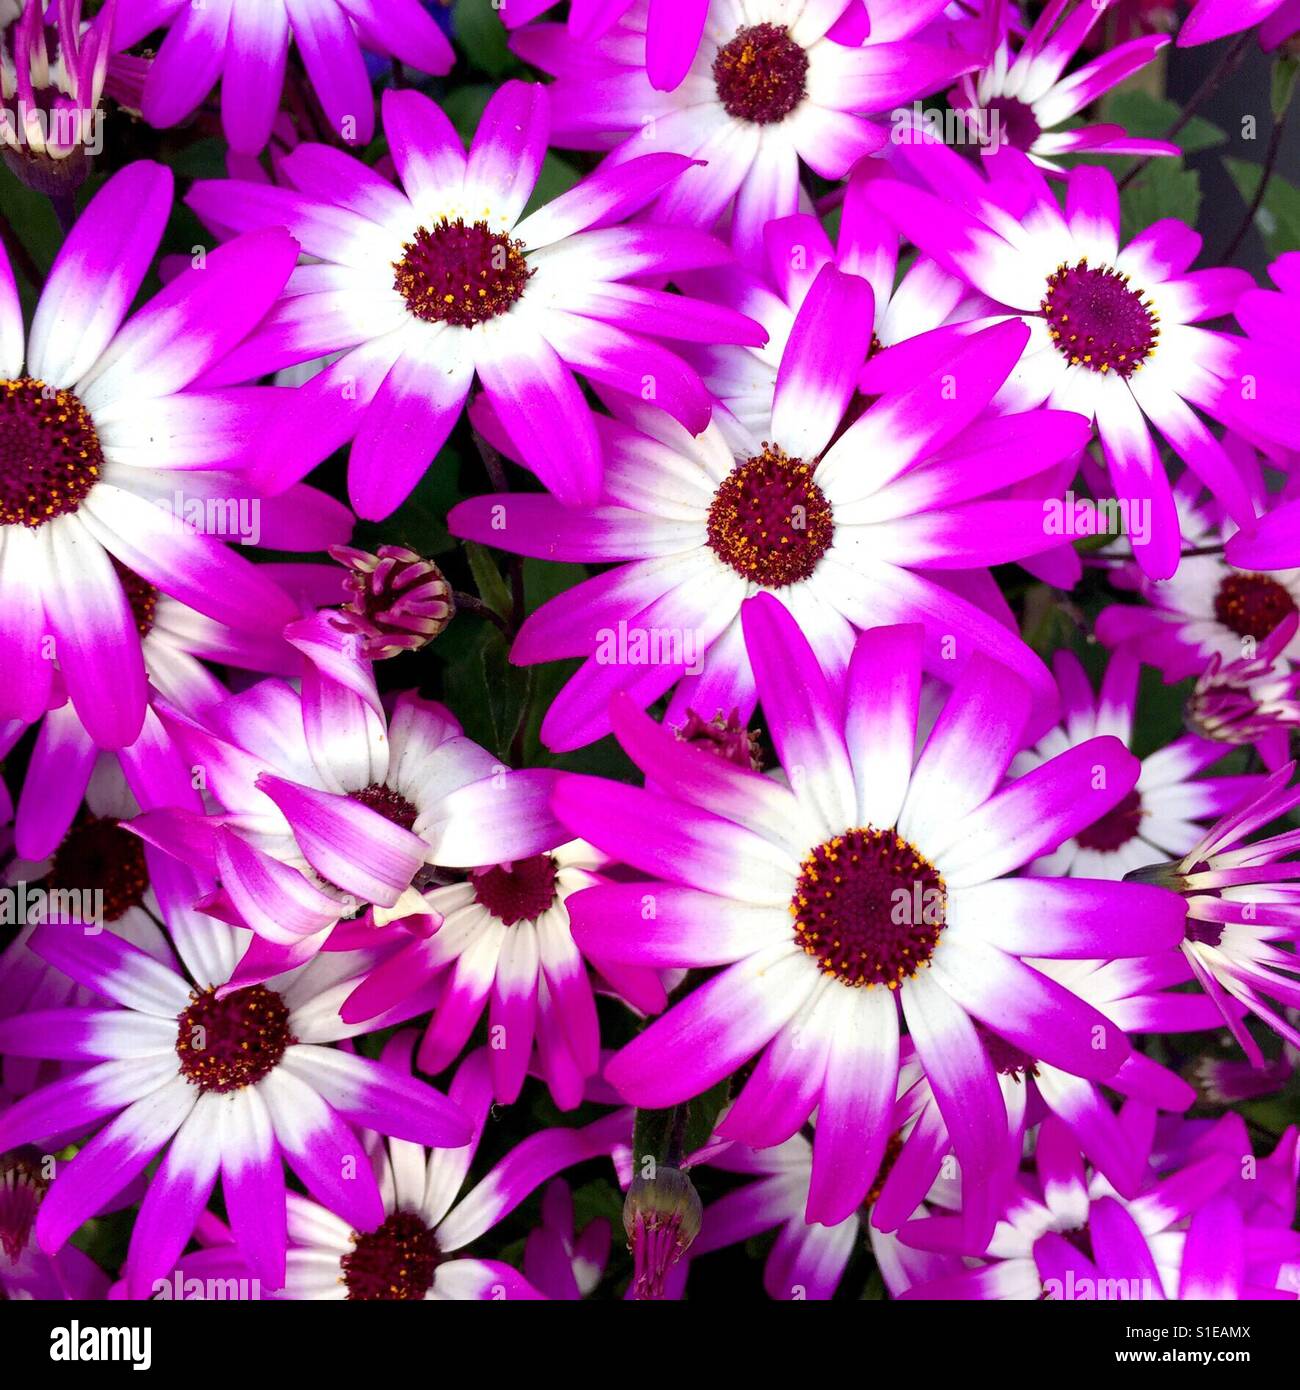 Violet pink Daisy with white centers Stock Photo